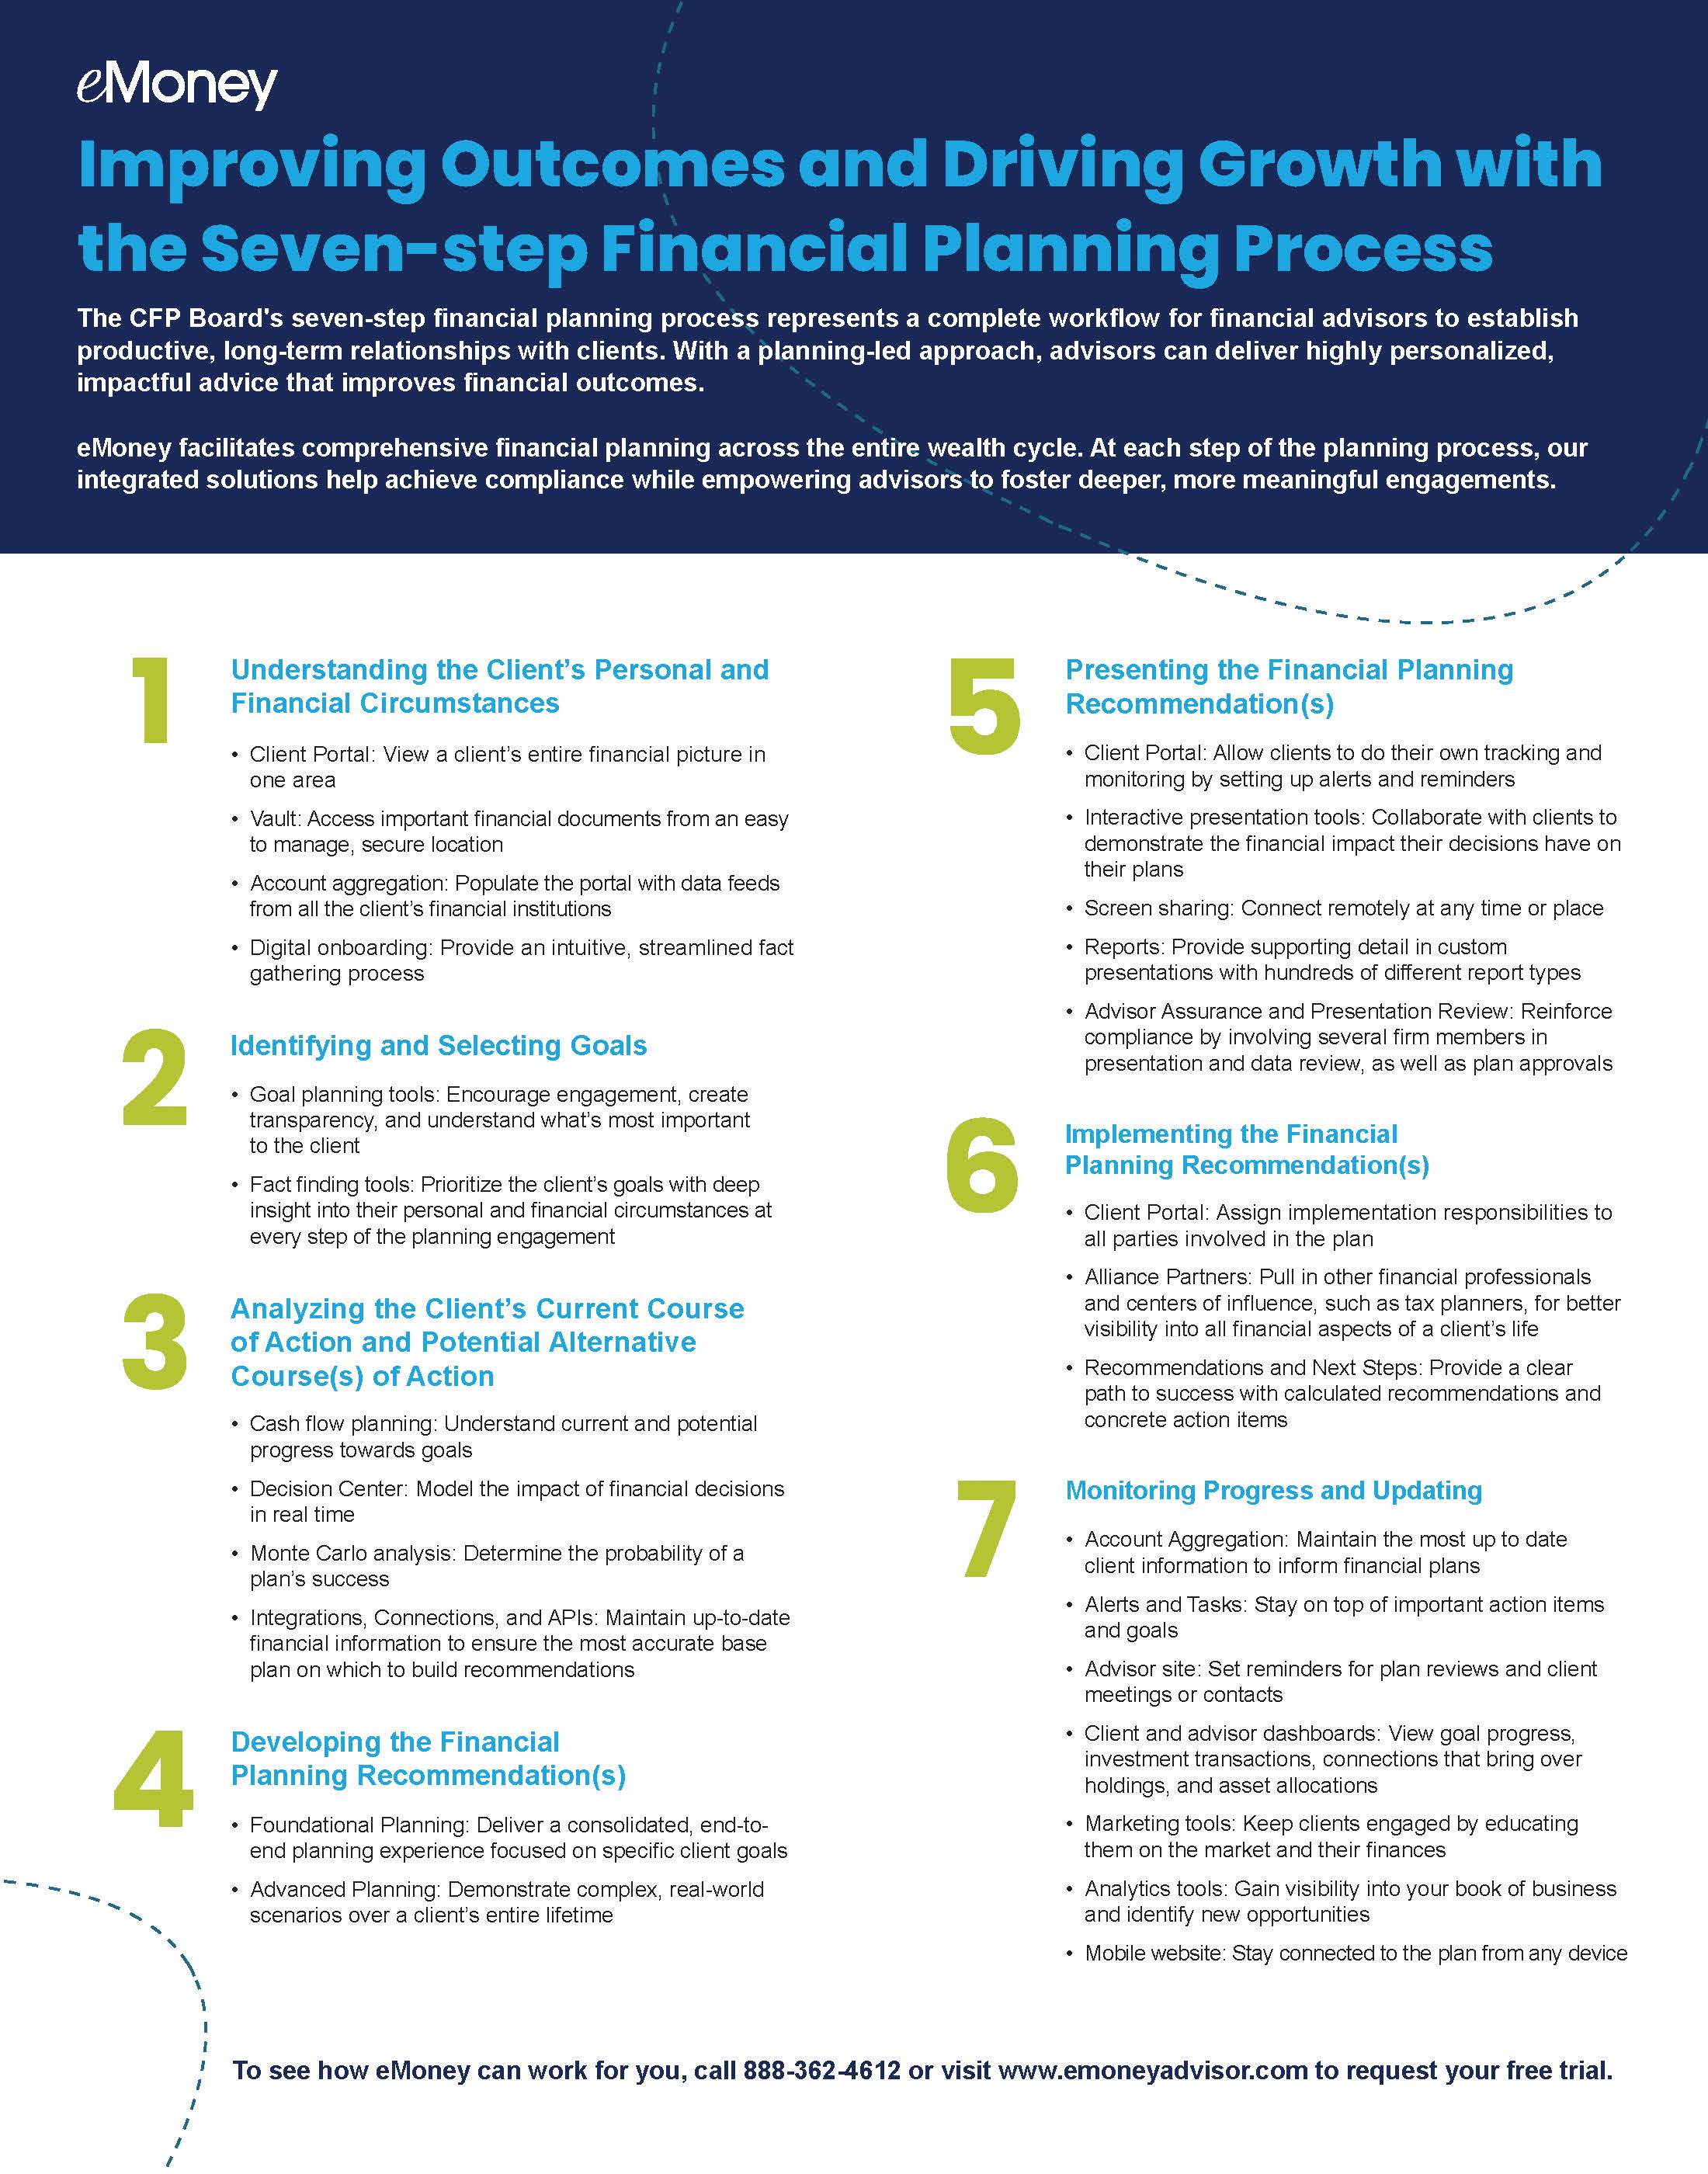 Applying the seven step financial planning process with eMoney infographic